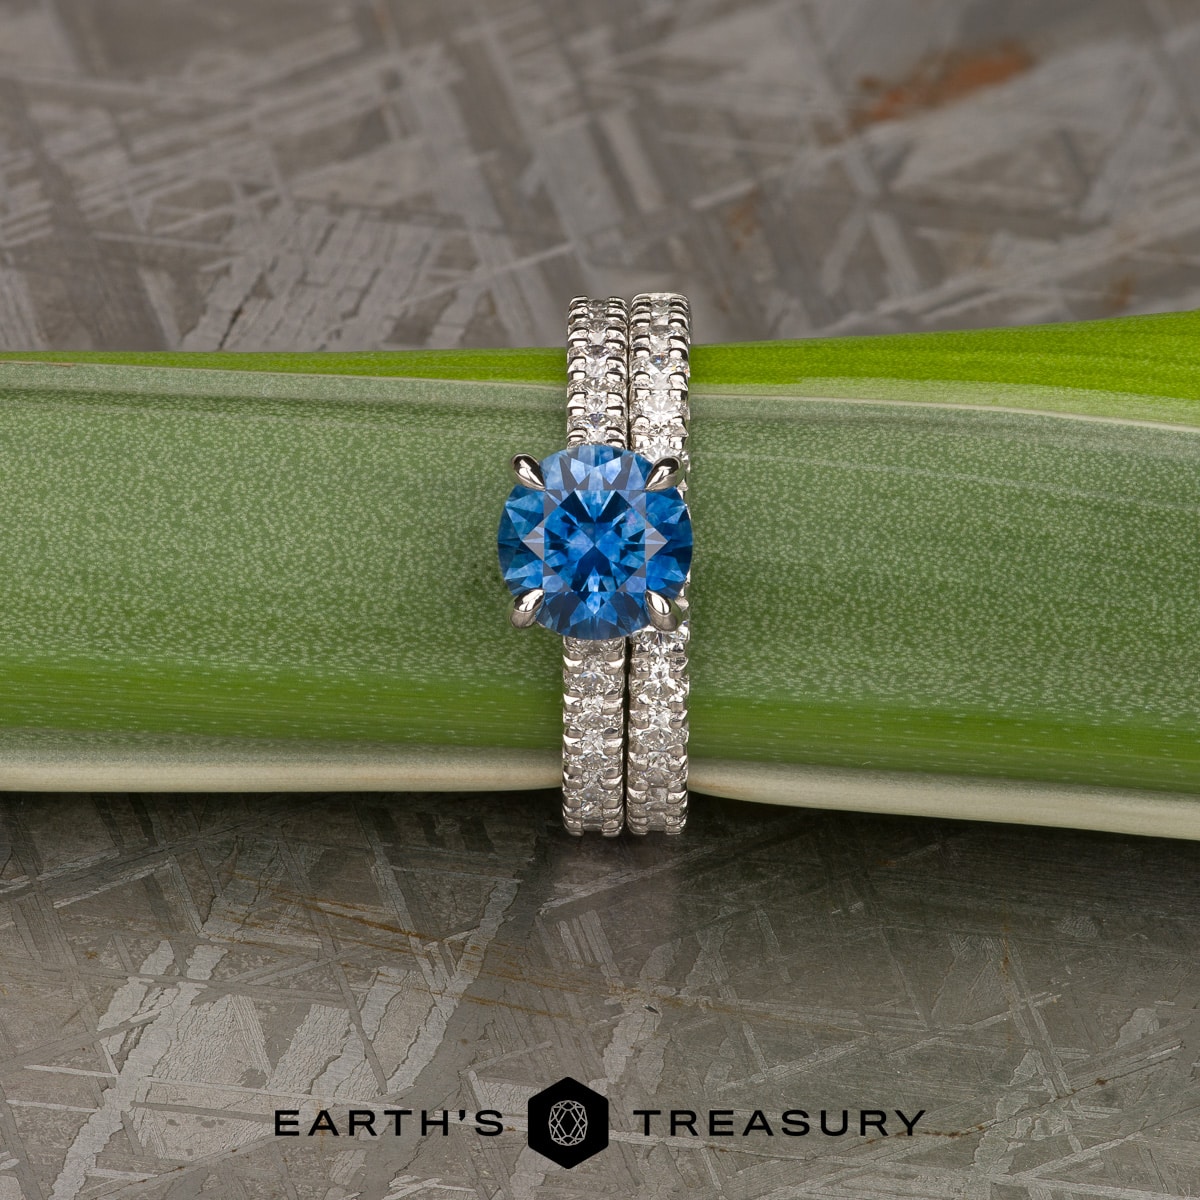 The "Marina" Deluxe Pave Ring in platinum with 1.79-Carat Montana Sapphire alongside the deluxe pave band in platinum